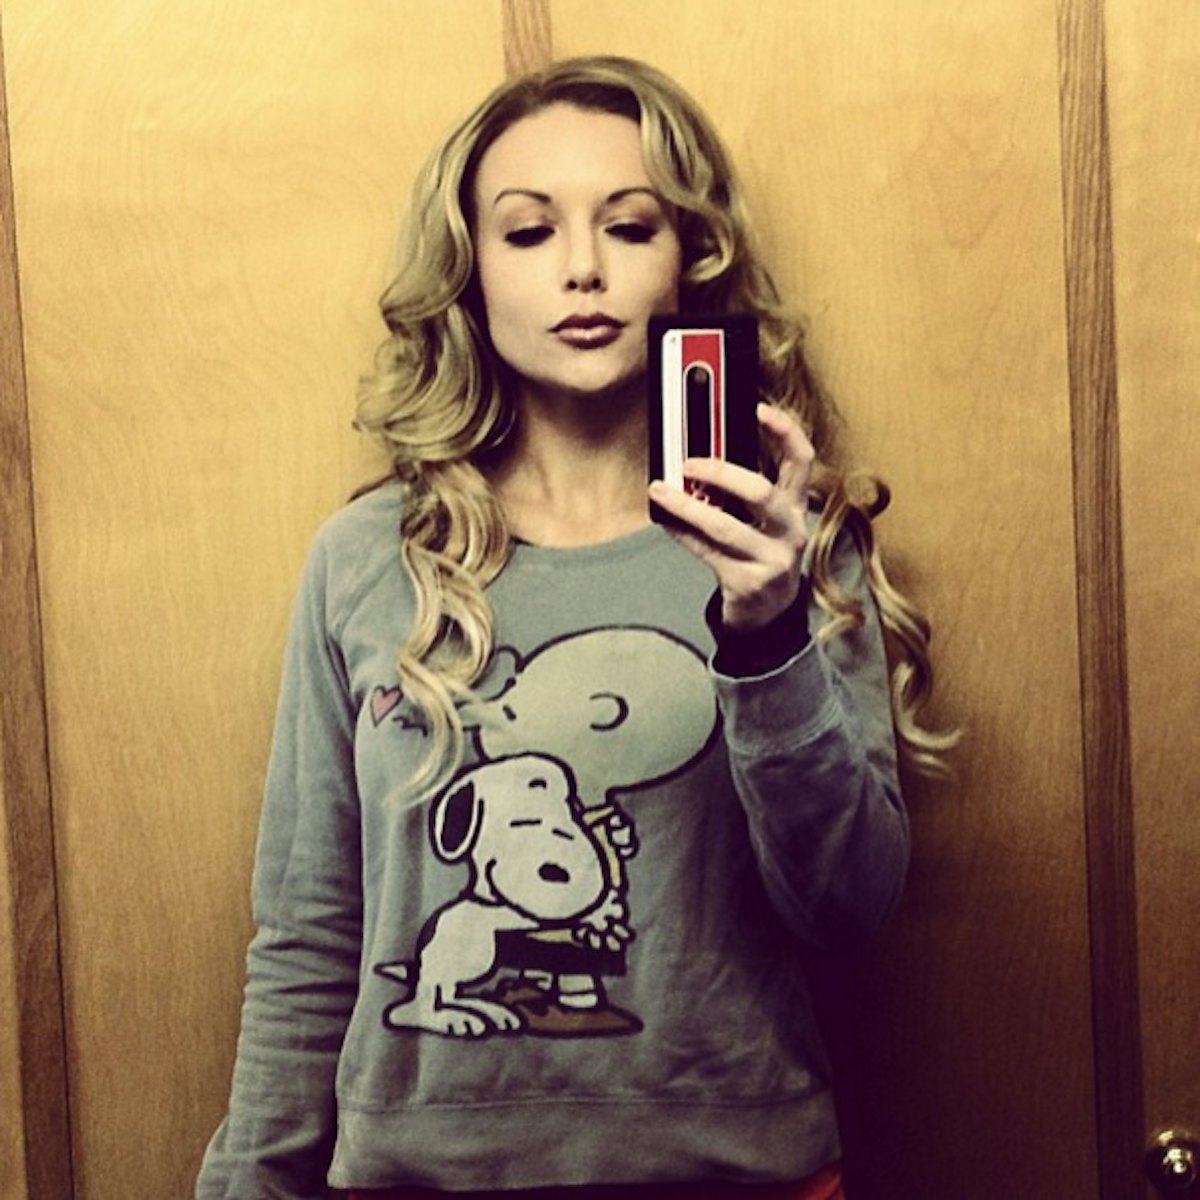 christopher prioleau recommends kayden kross breaking bad pic